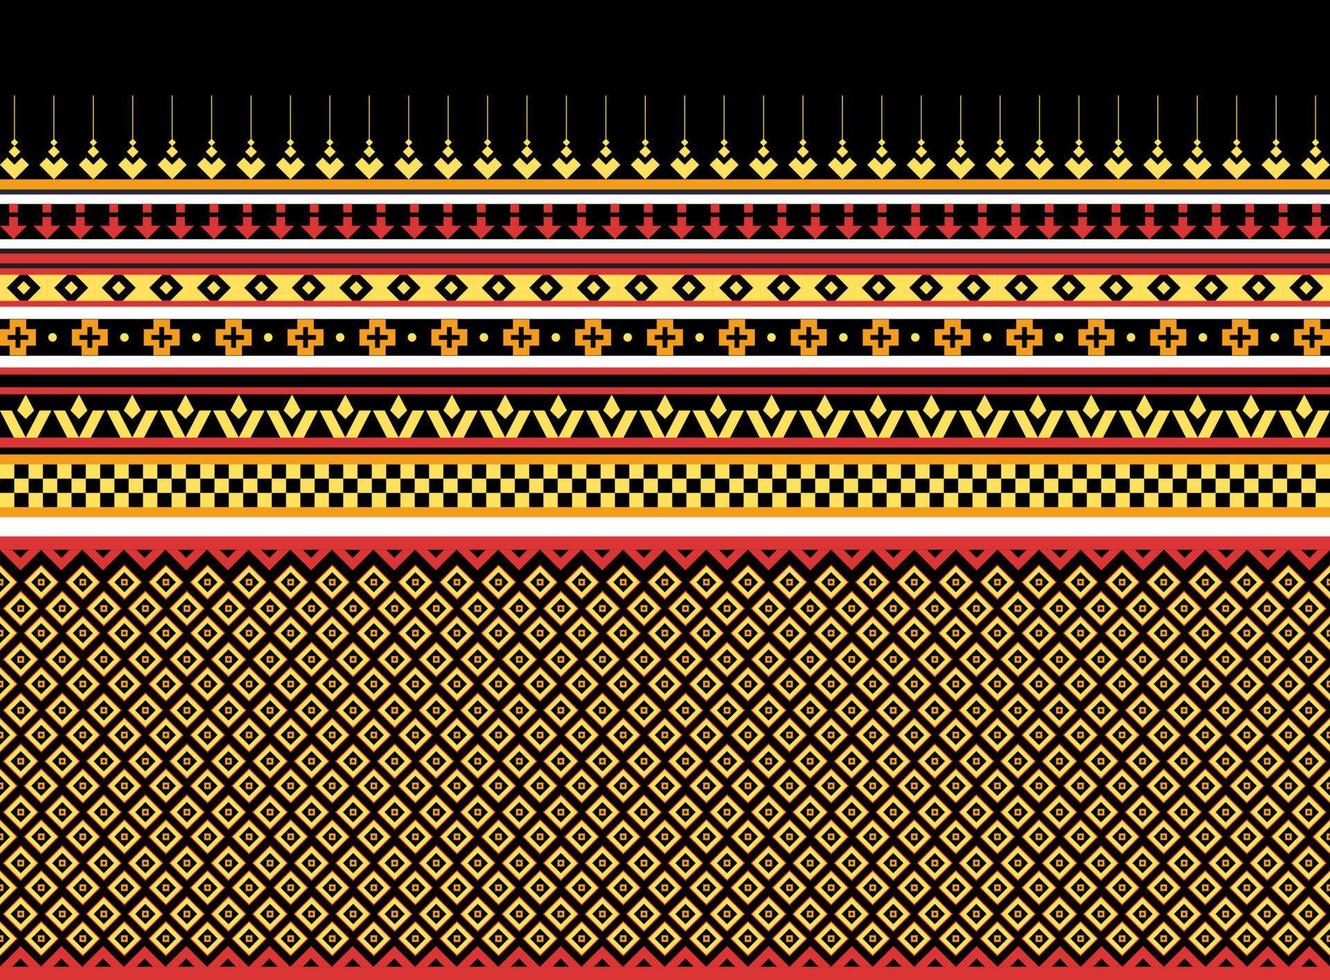 Geometric ethnic oriental pattern background. Design for texture, wrapping, clothing, batik, fabric, wallpaper and background. Pattern embroidery design. vector